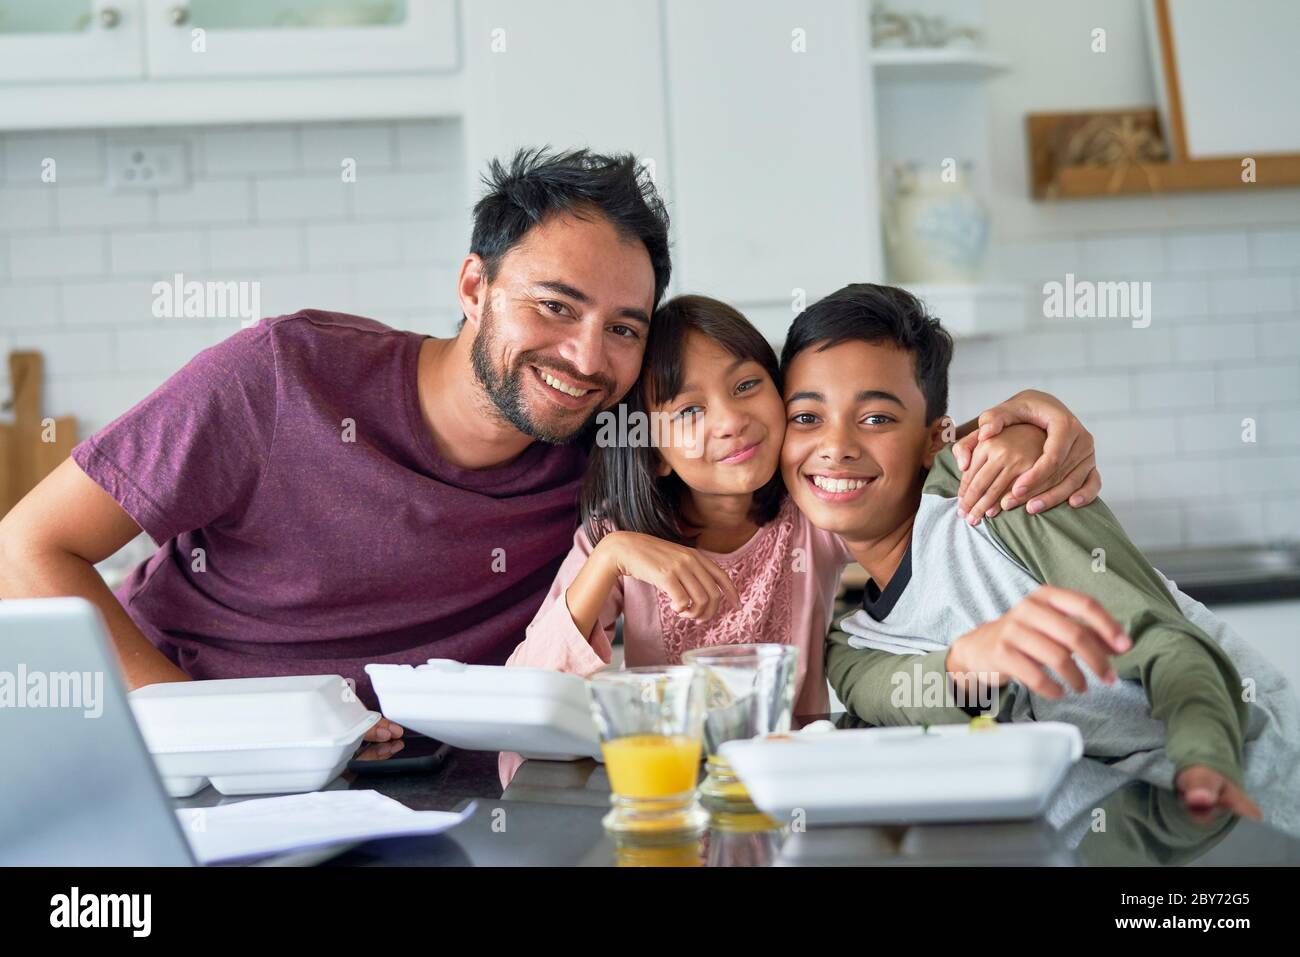 Portrait happy father and kids eating takeout food in kitchen Stock Photo